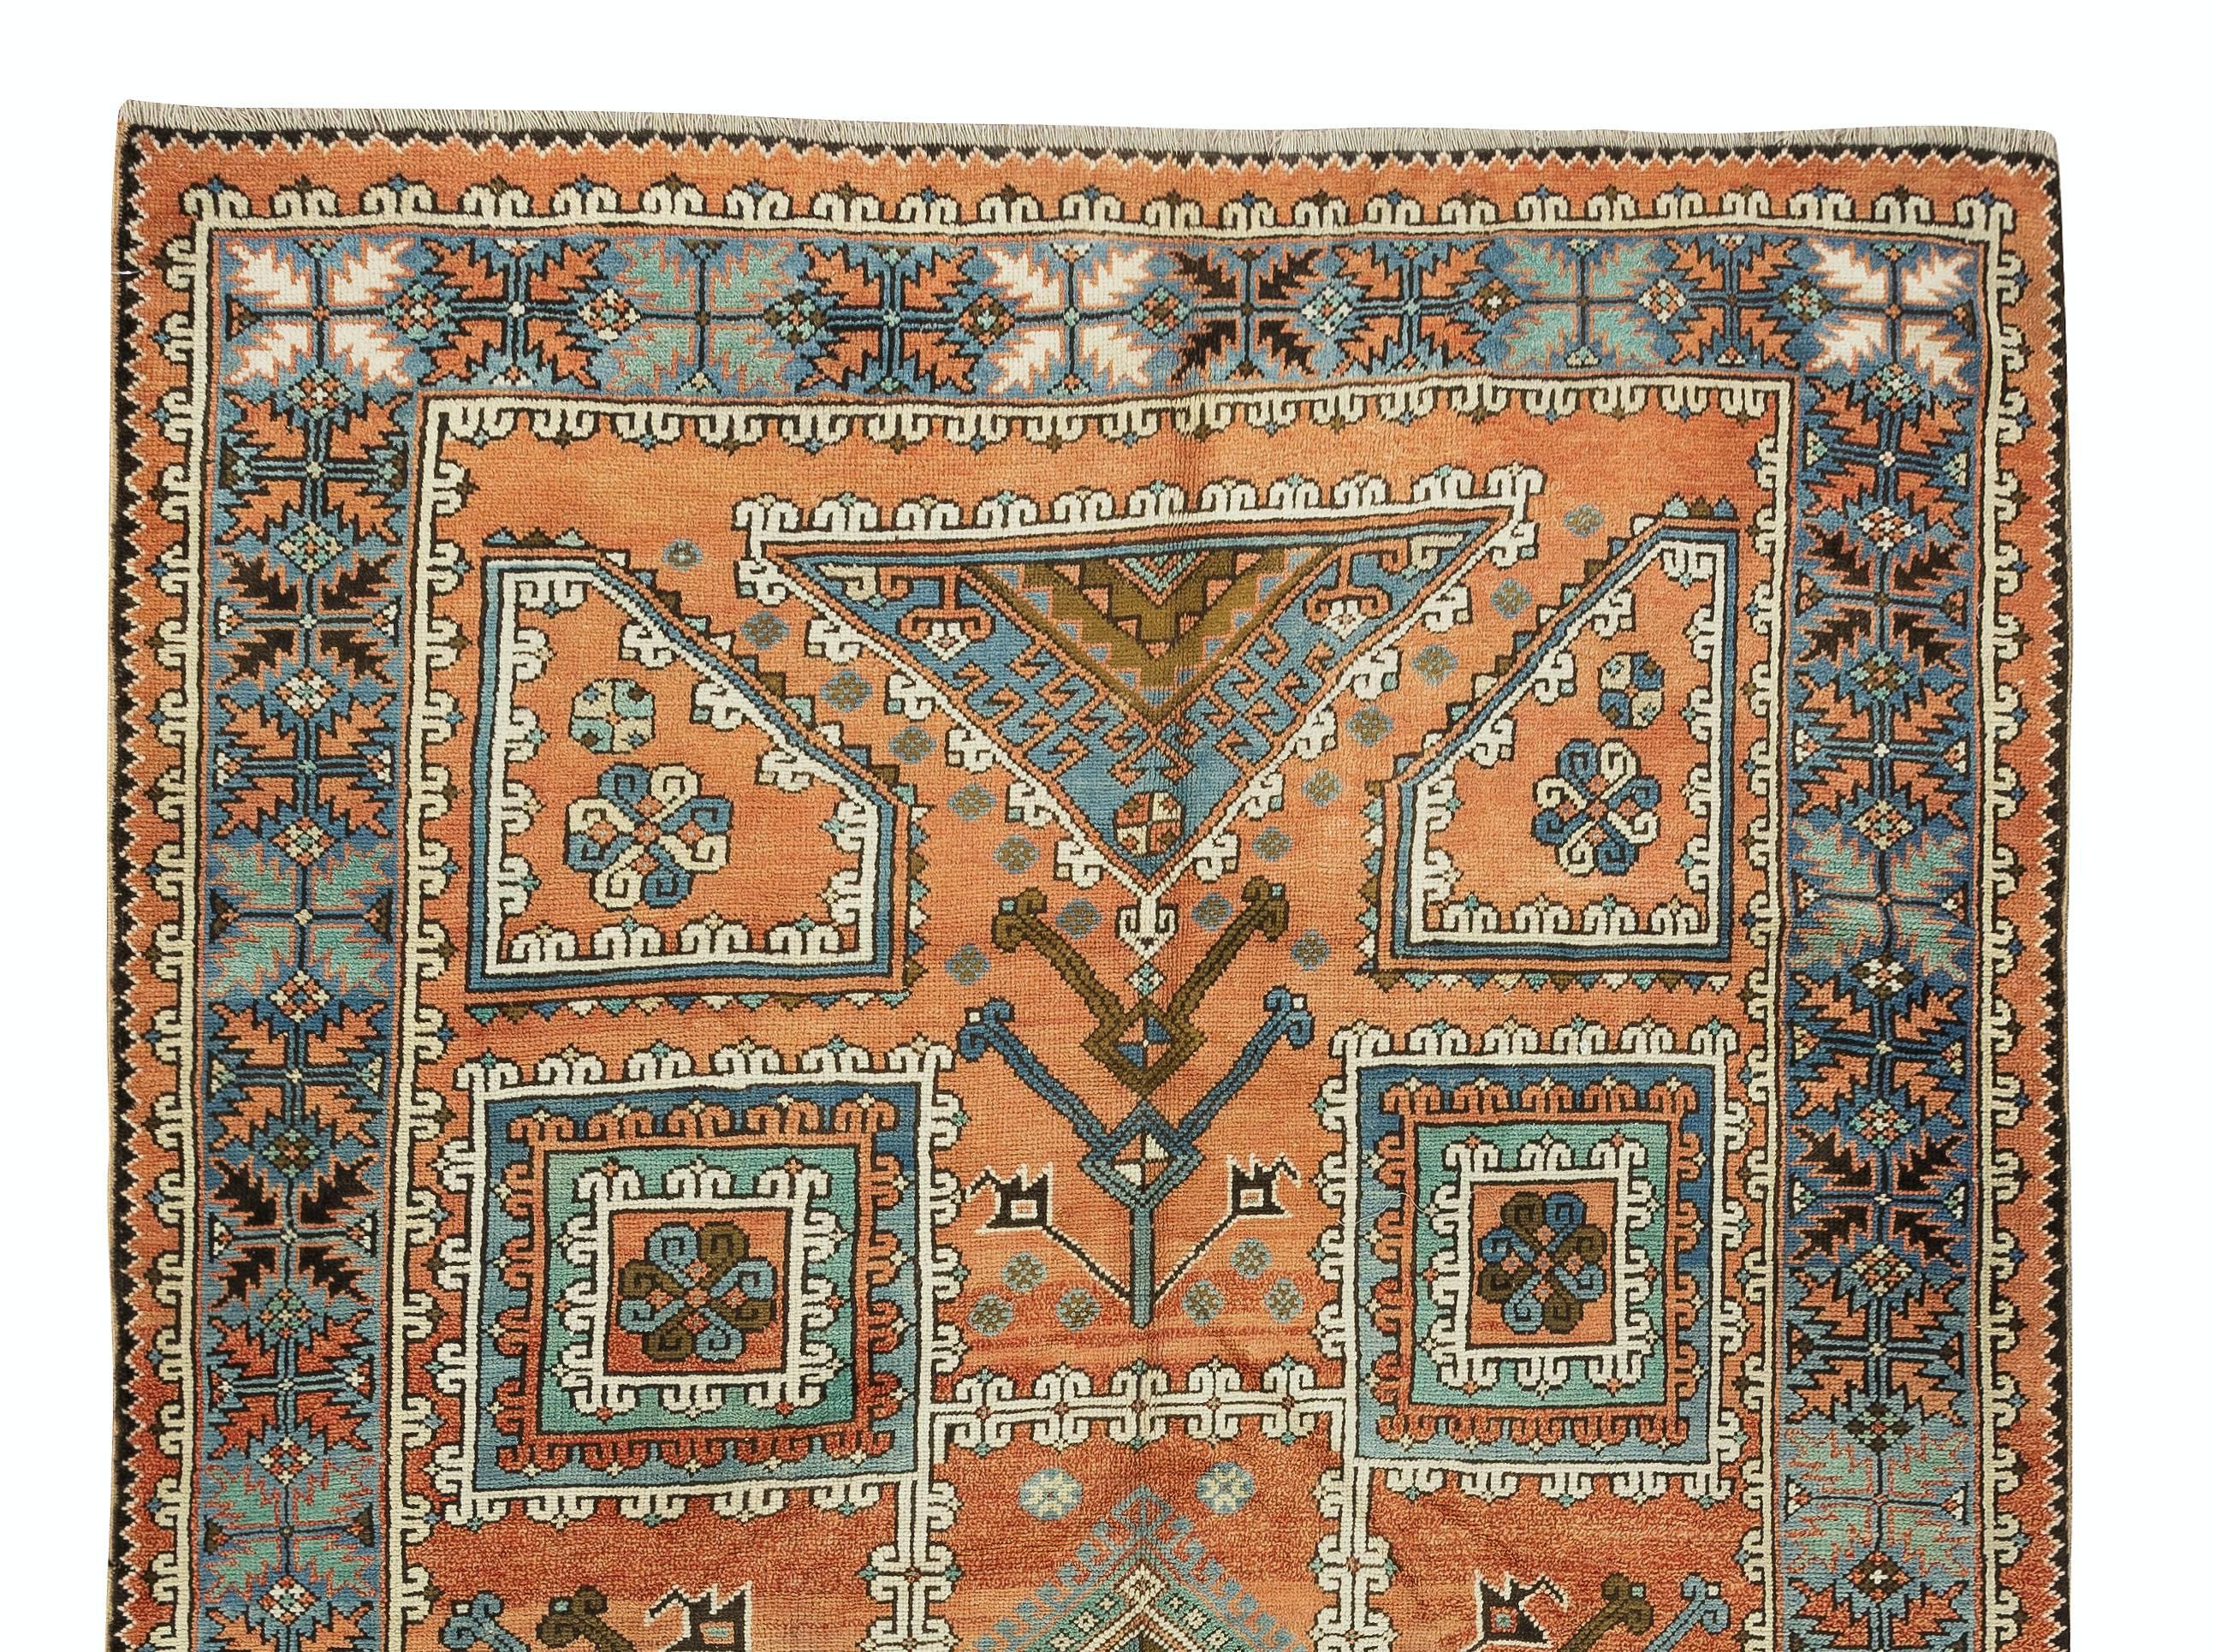 Hand-Woven 5.7x9 Ft Antique Turkish Bergama Rug, Circa 1920 For Sale